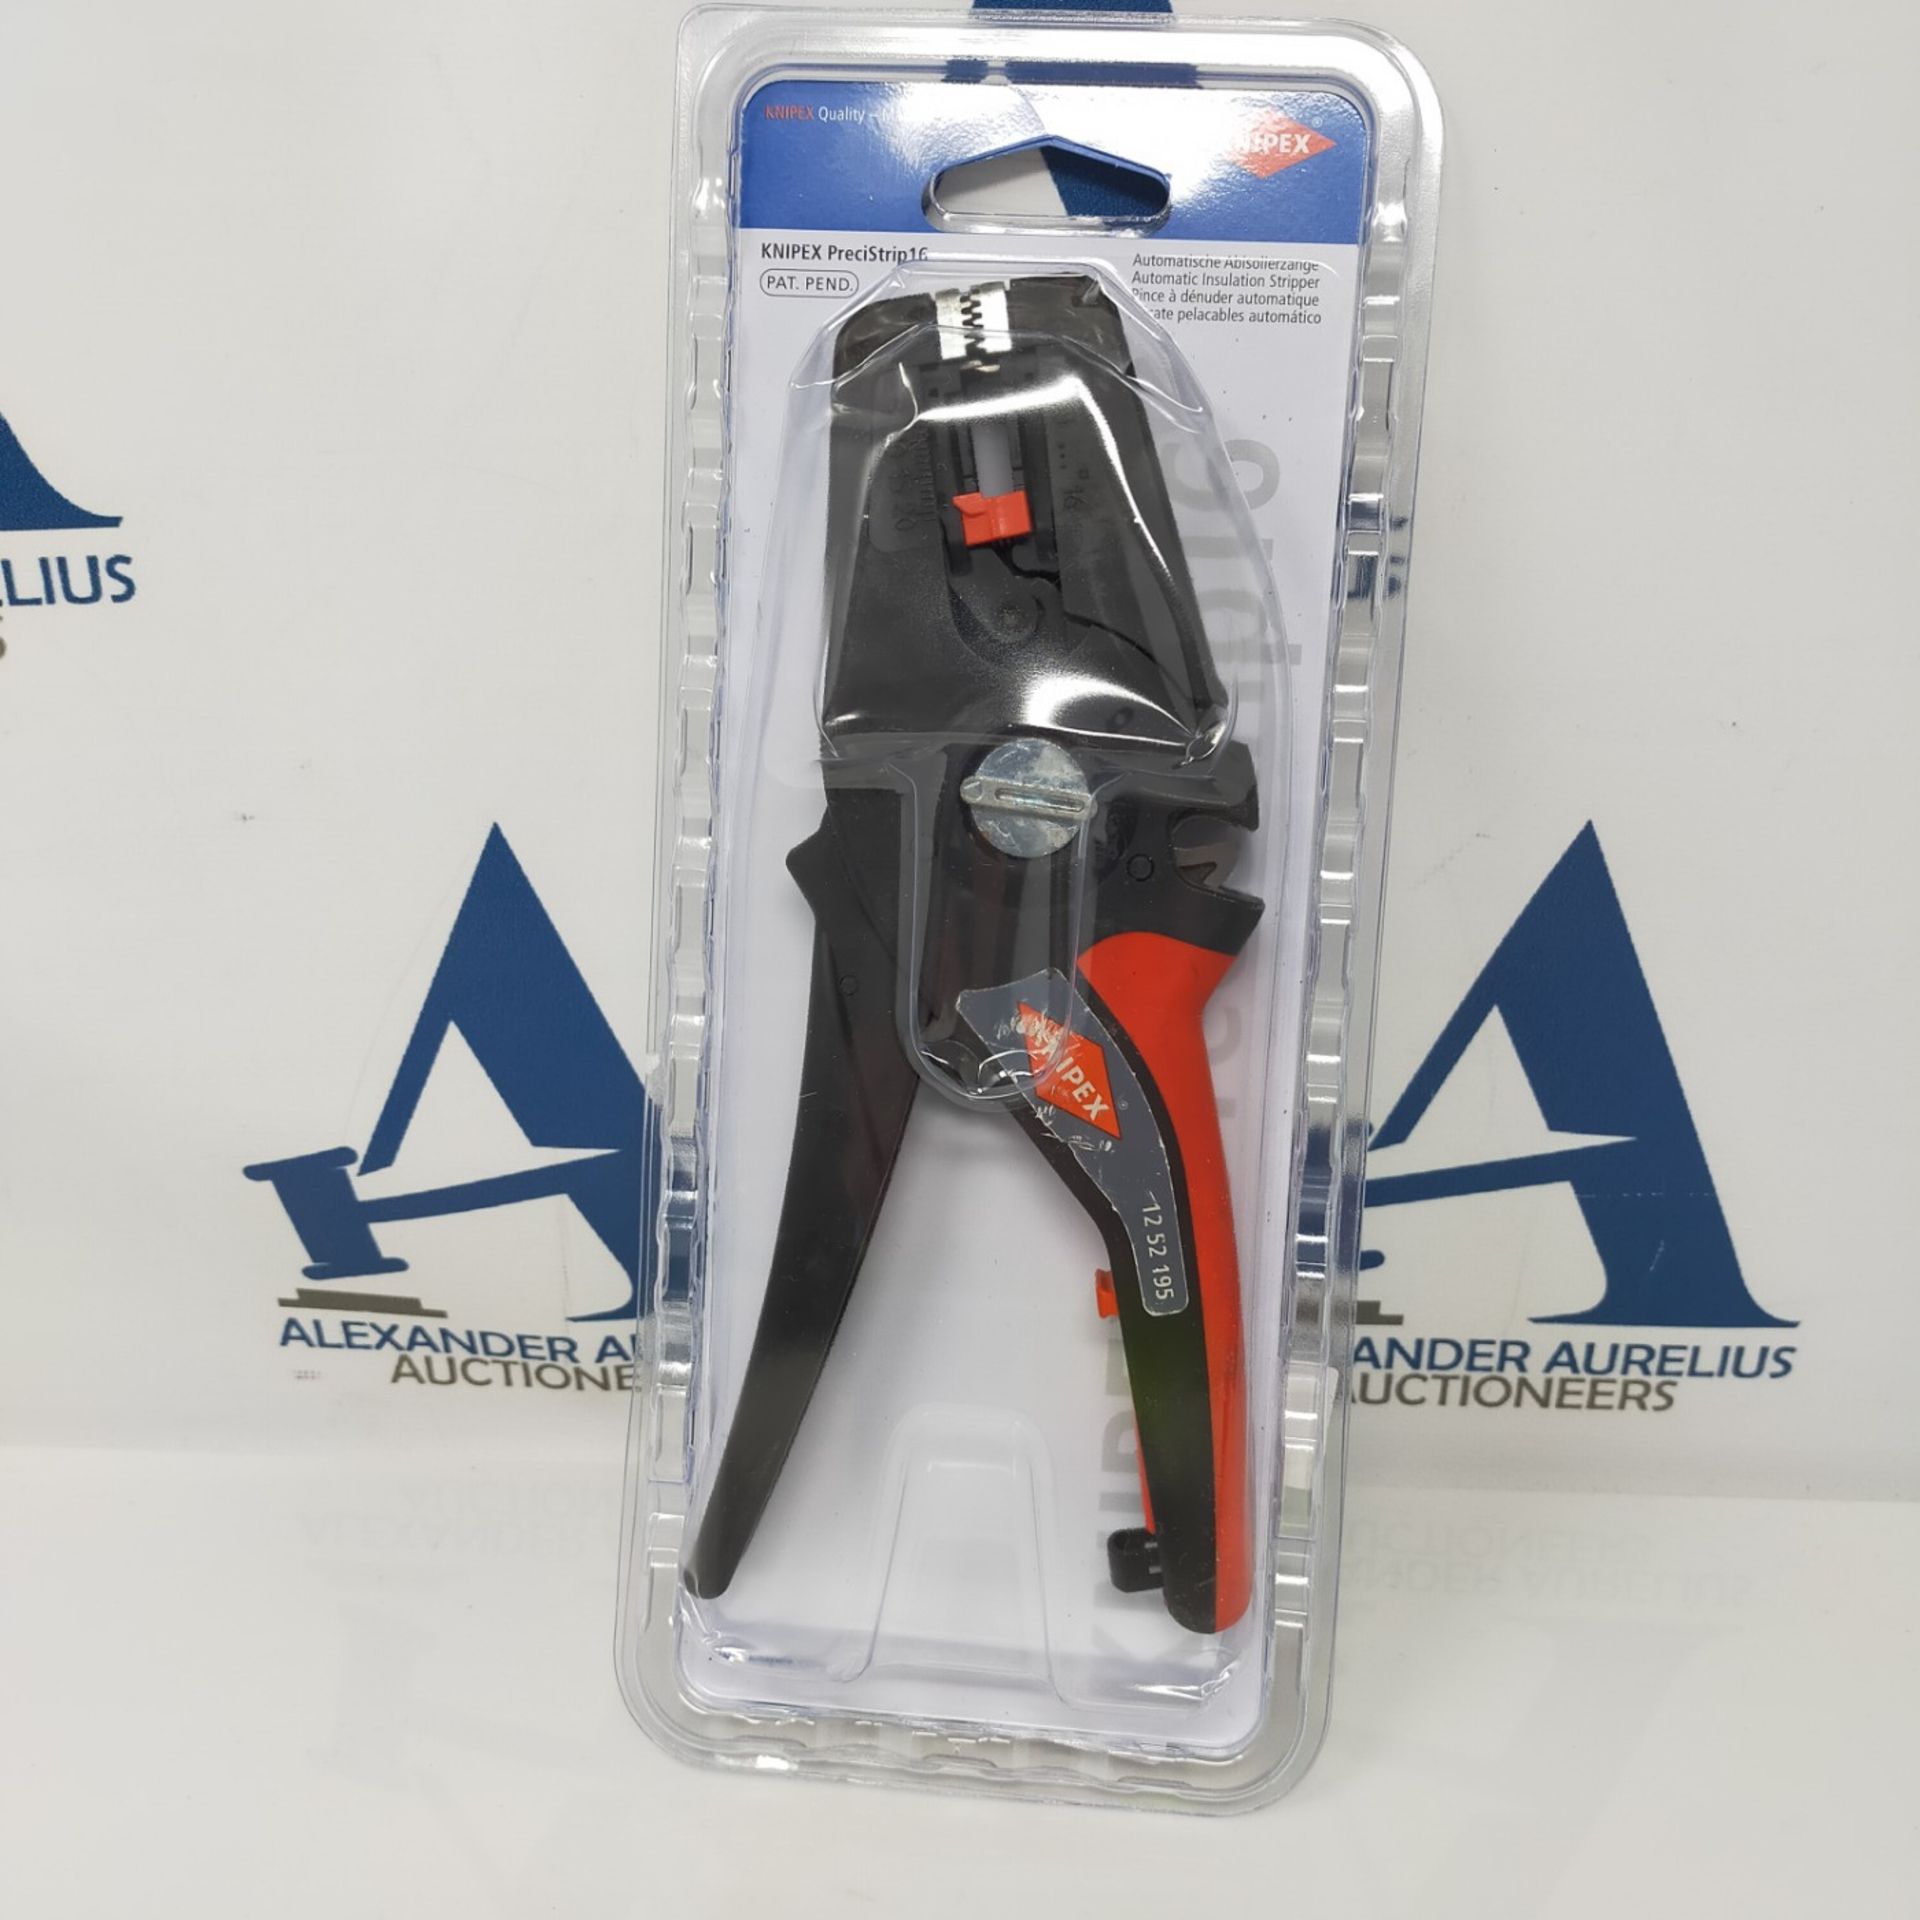 RRP £77.00 Knipex PreciStrip16 Automatic Insulation Stripper 195 mm (self-service card/blister) 1 - Image 4 of 5